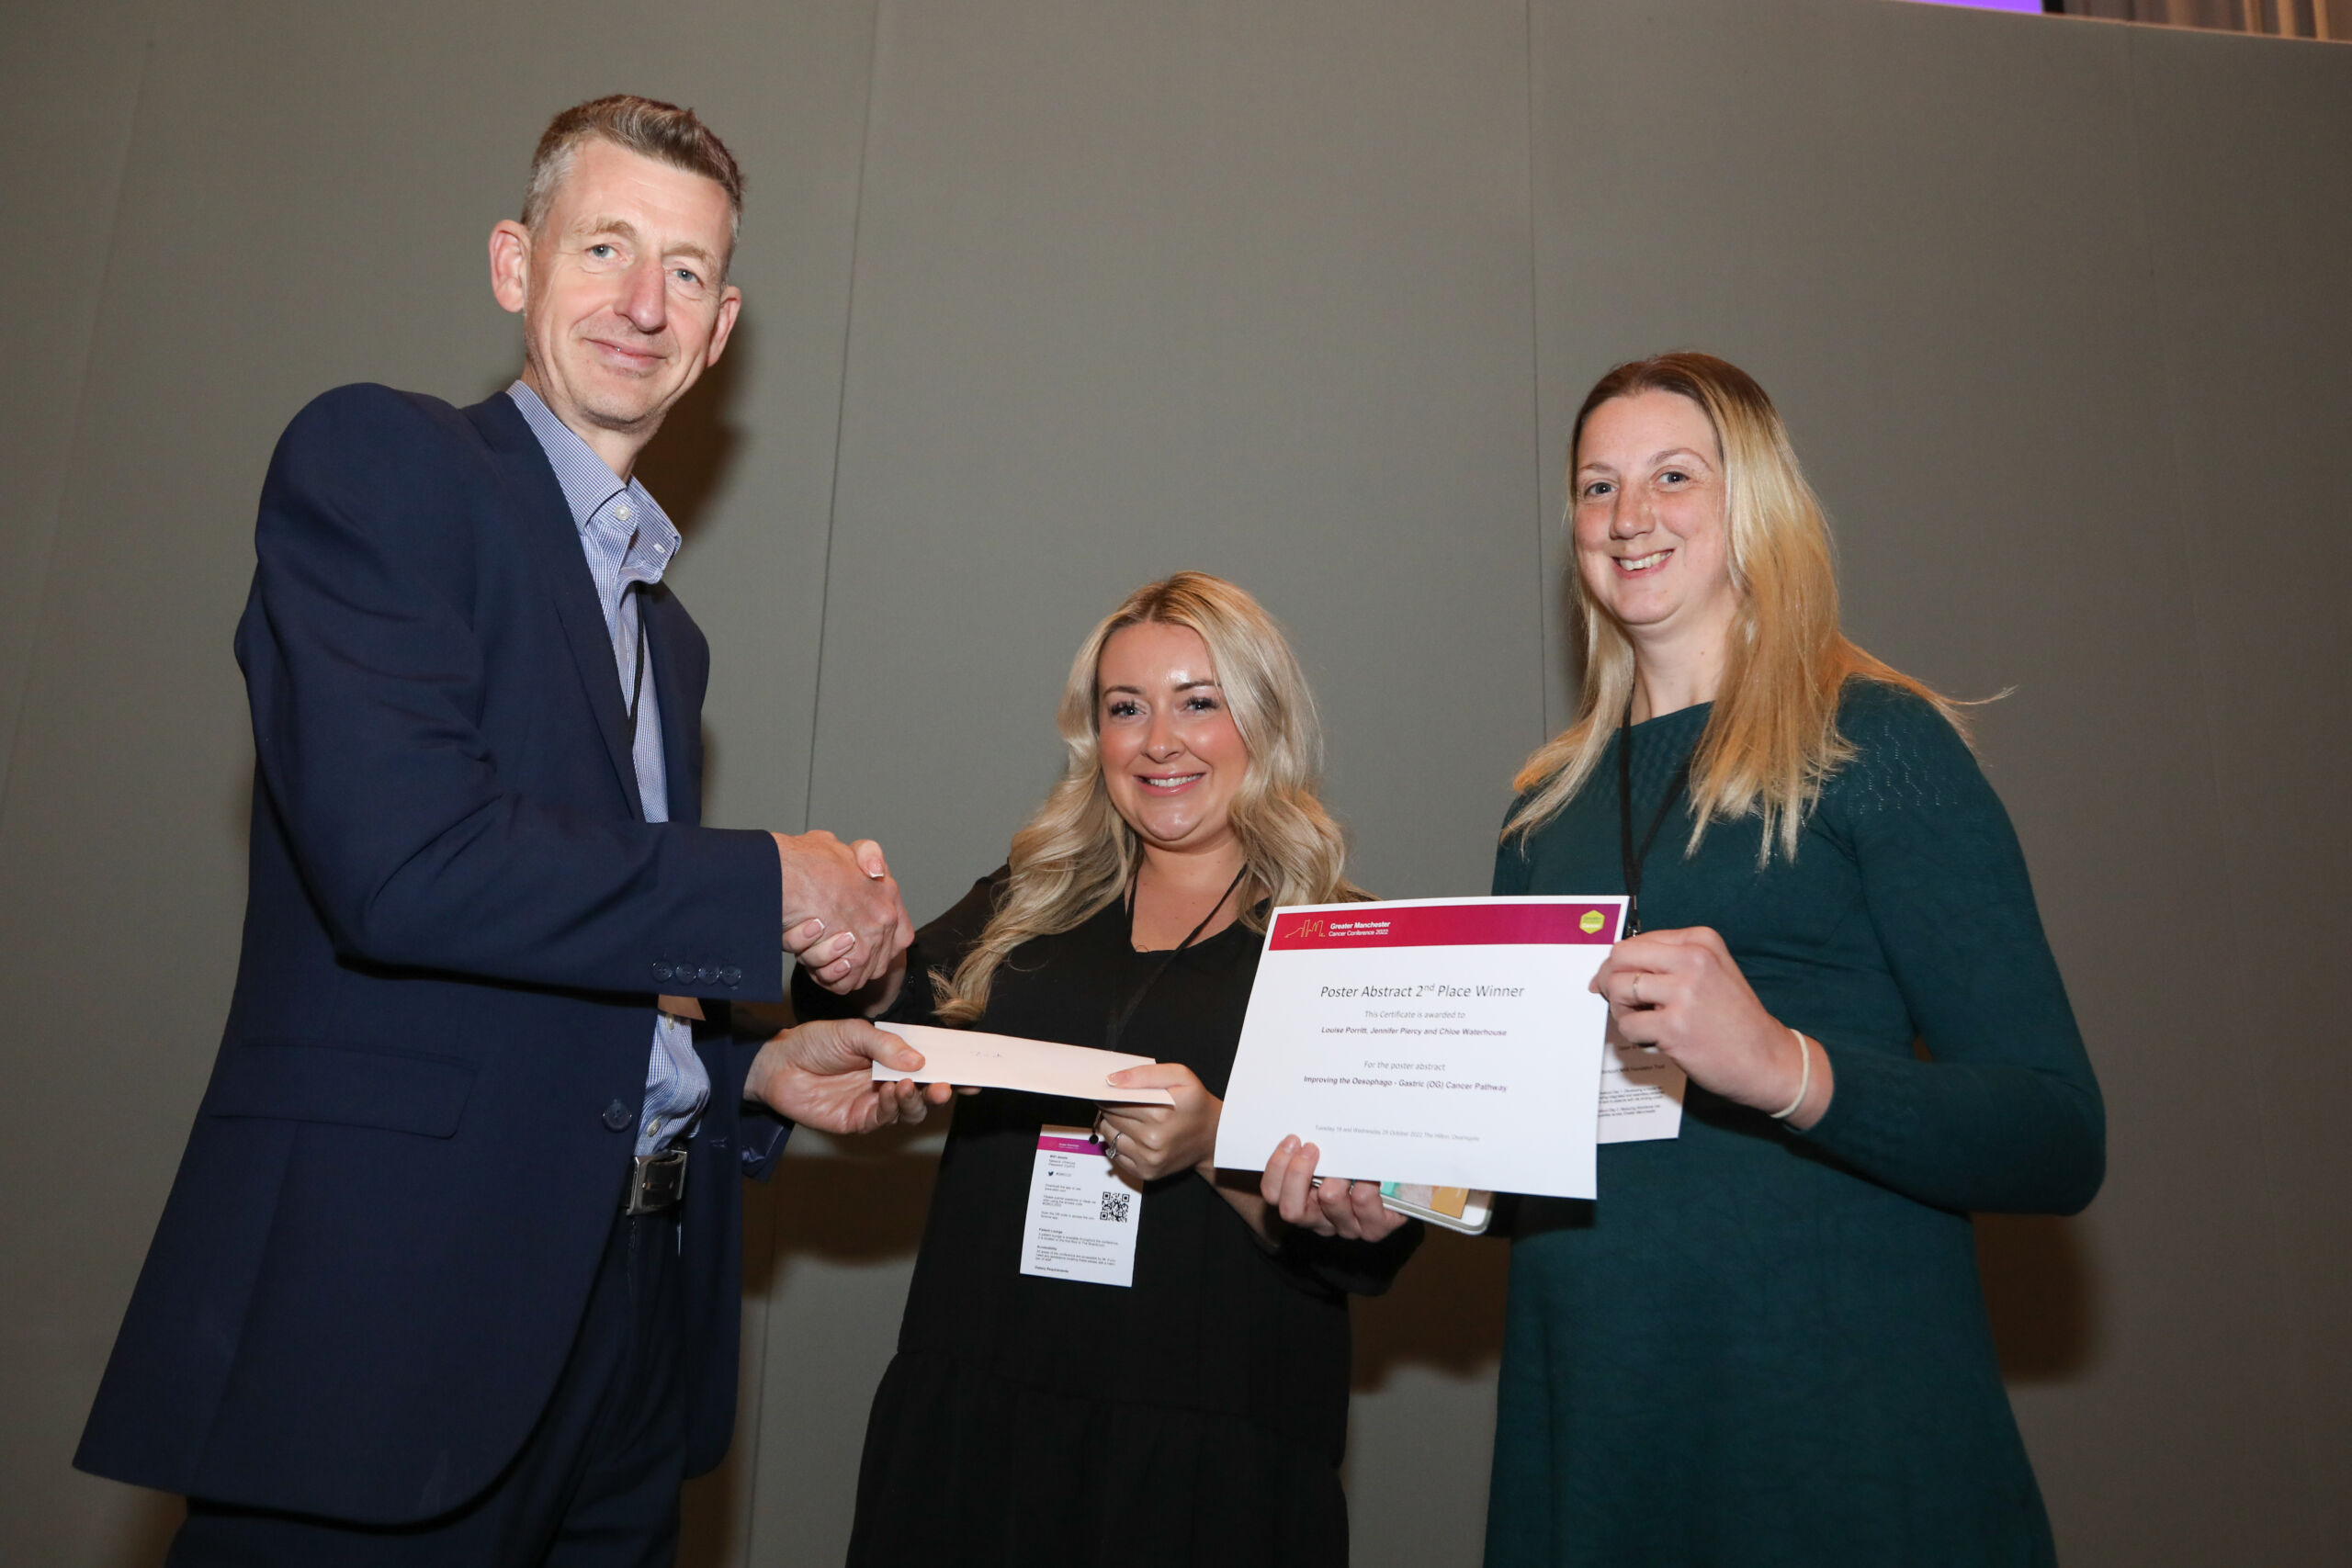 A man in a dark suit shakes hands with a woman with blonde hair while a second woman with blone hair holds a certifcatino saying Poster Awards Second Place Winner